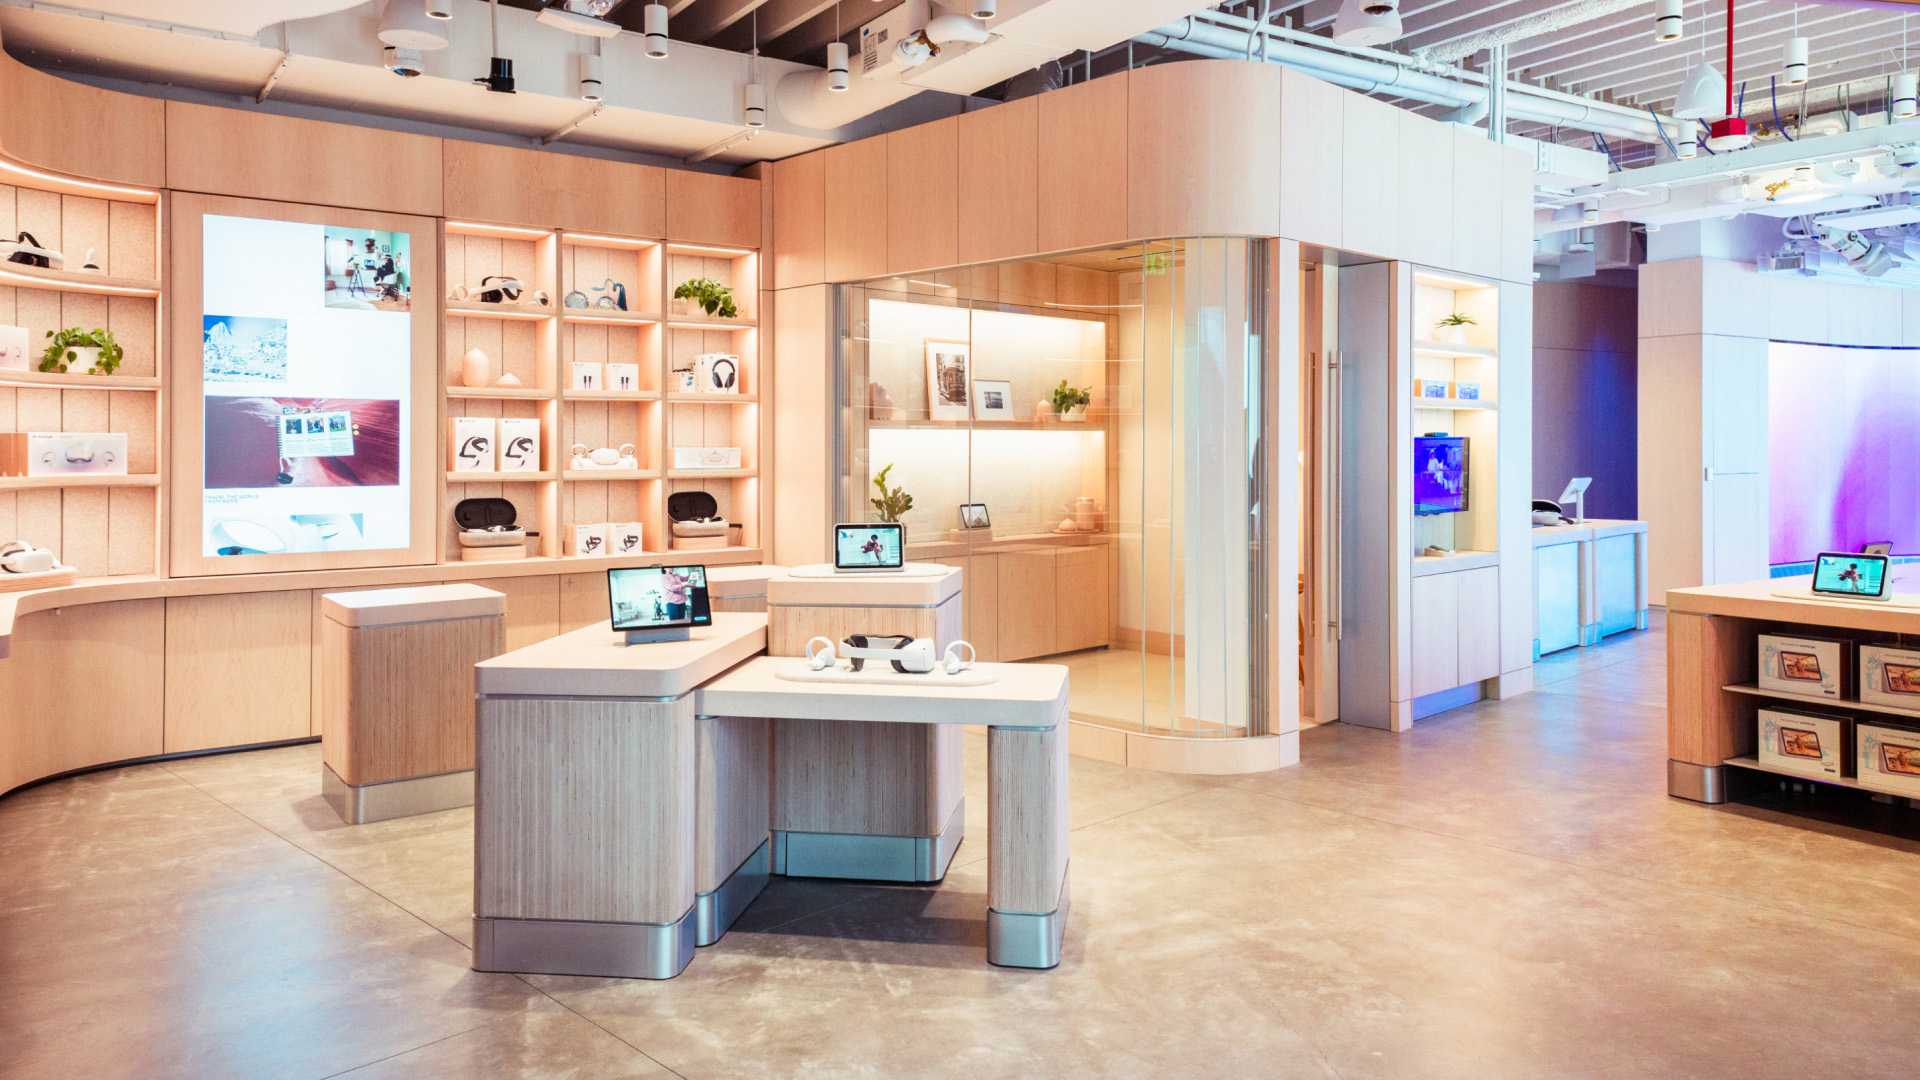 Meta opens first store to showcase its virtual and augmented reality products